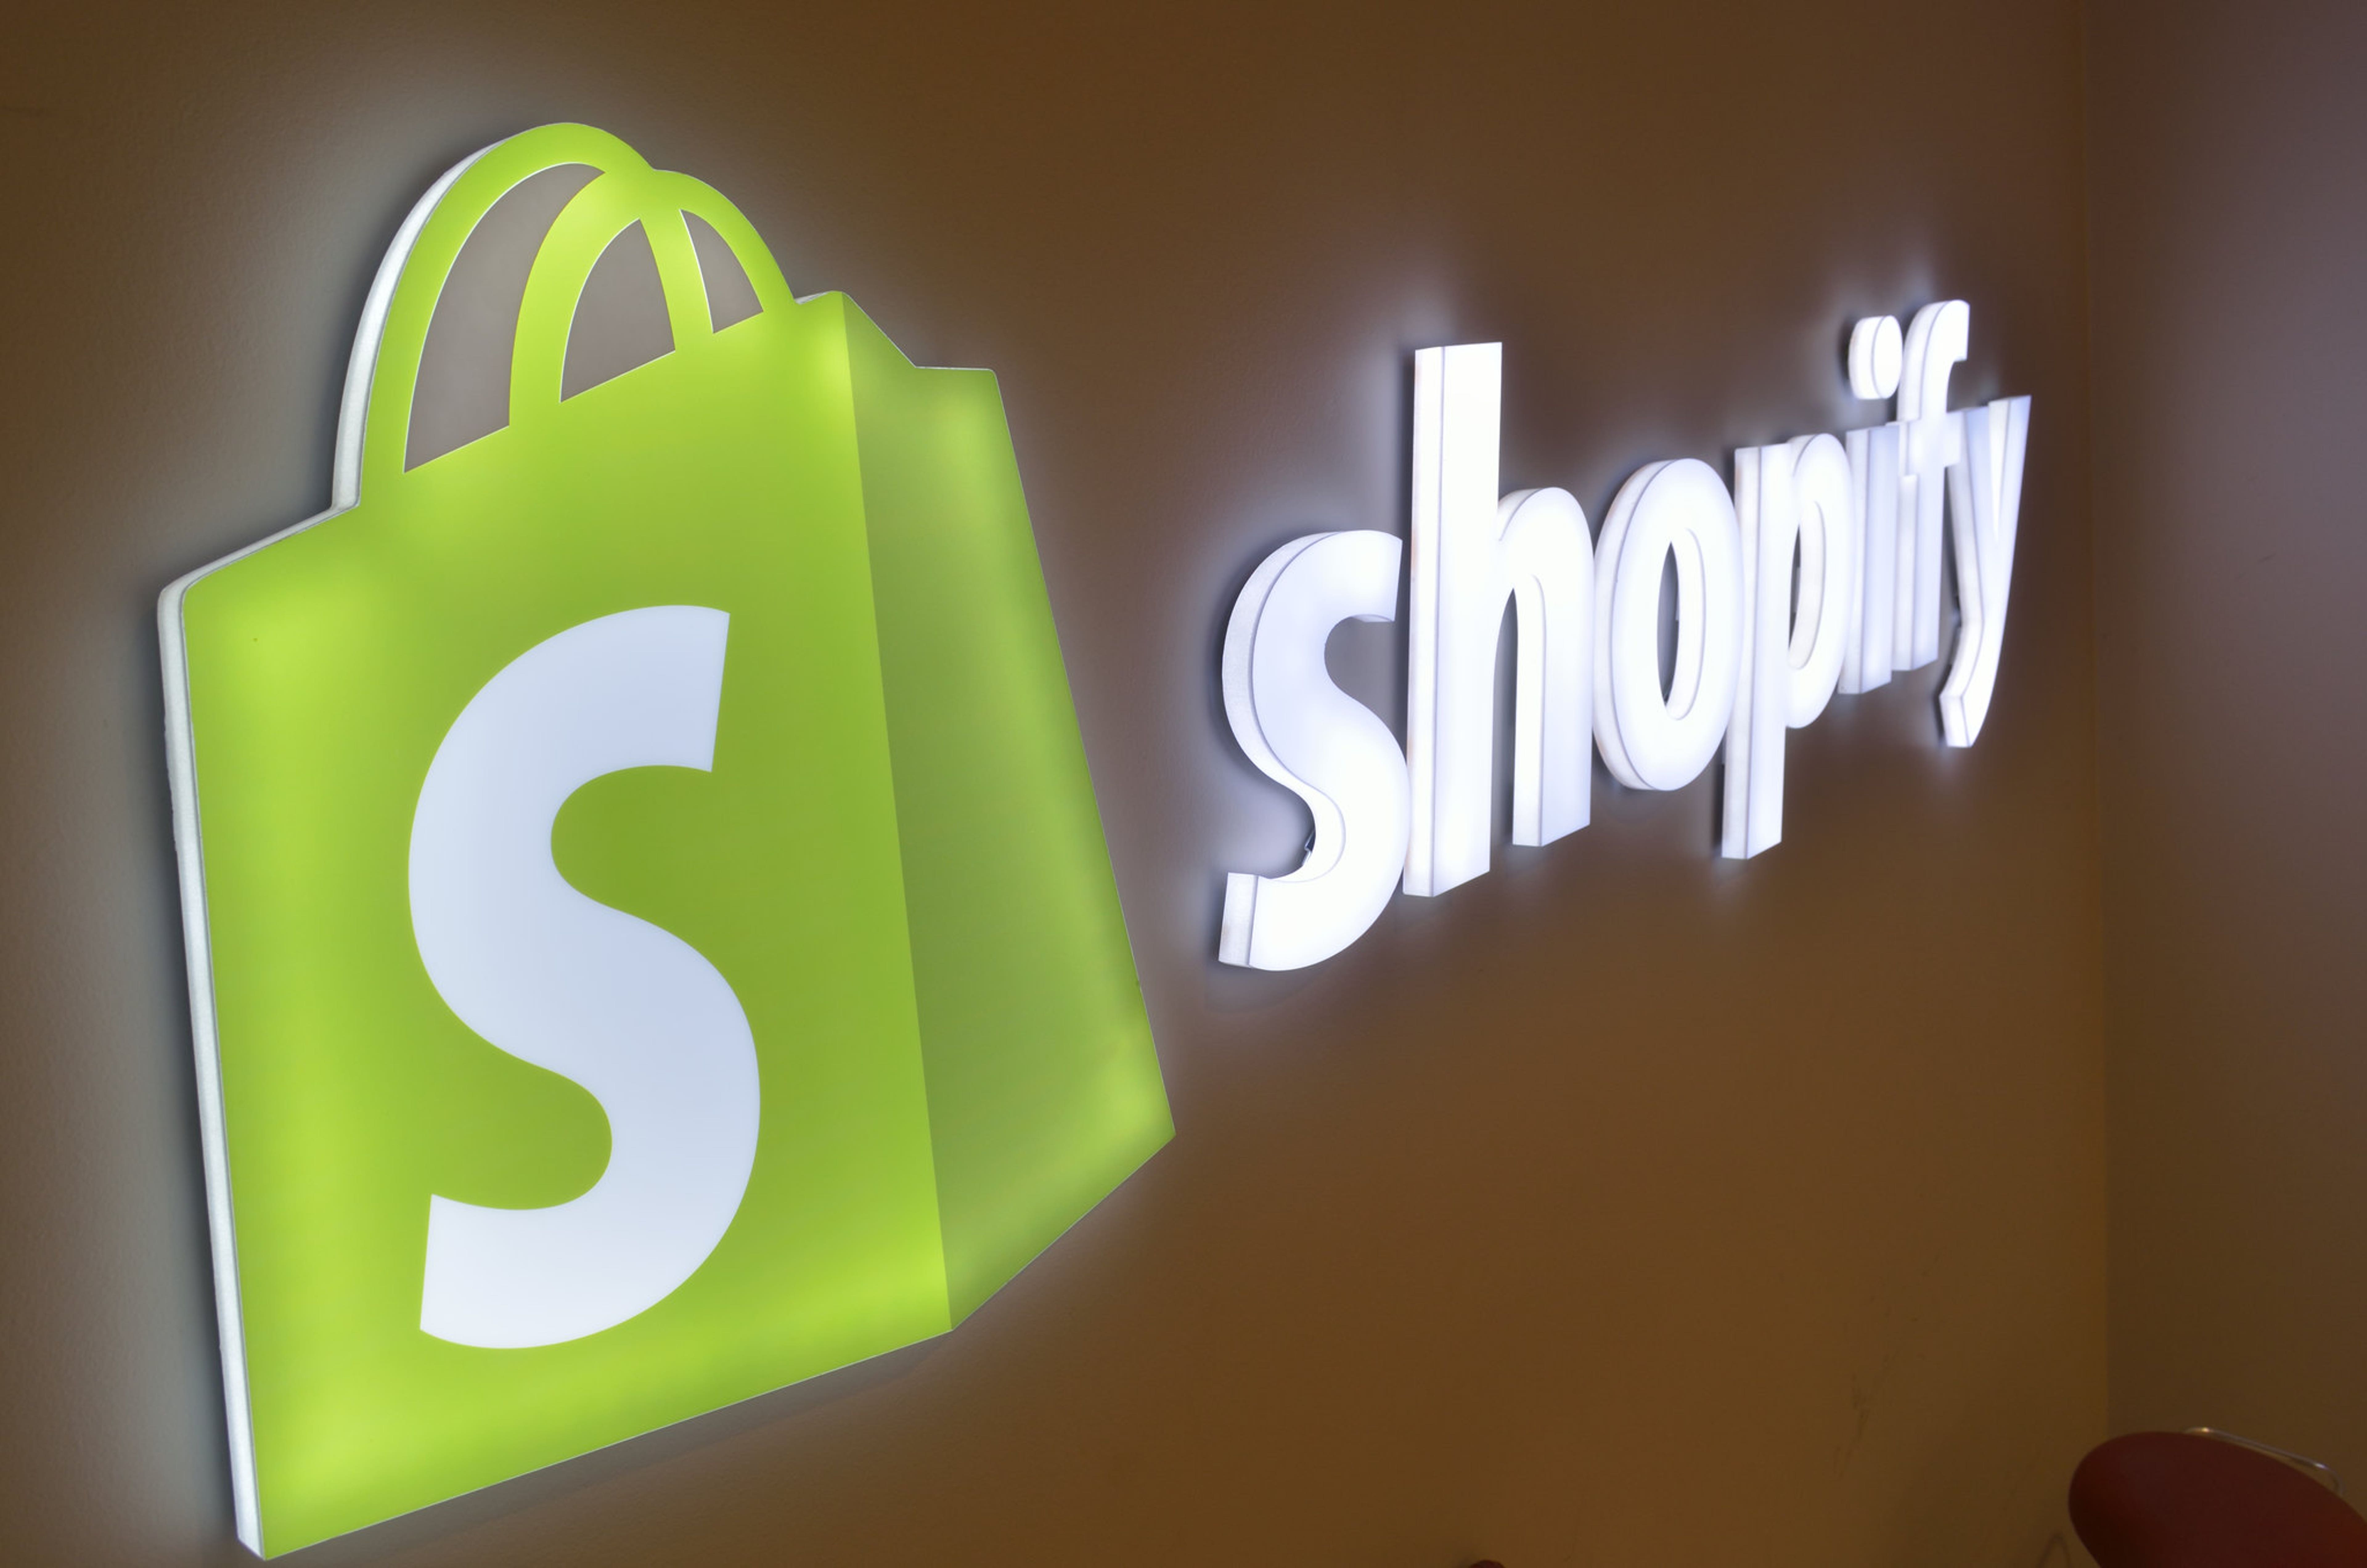 Shopify Stock Begins Trading On Split-Adjusted Basis: What You Need To Know